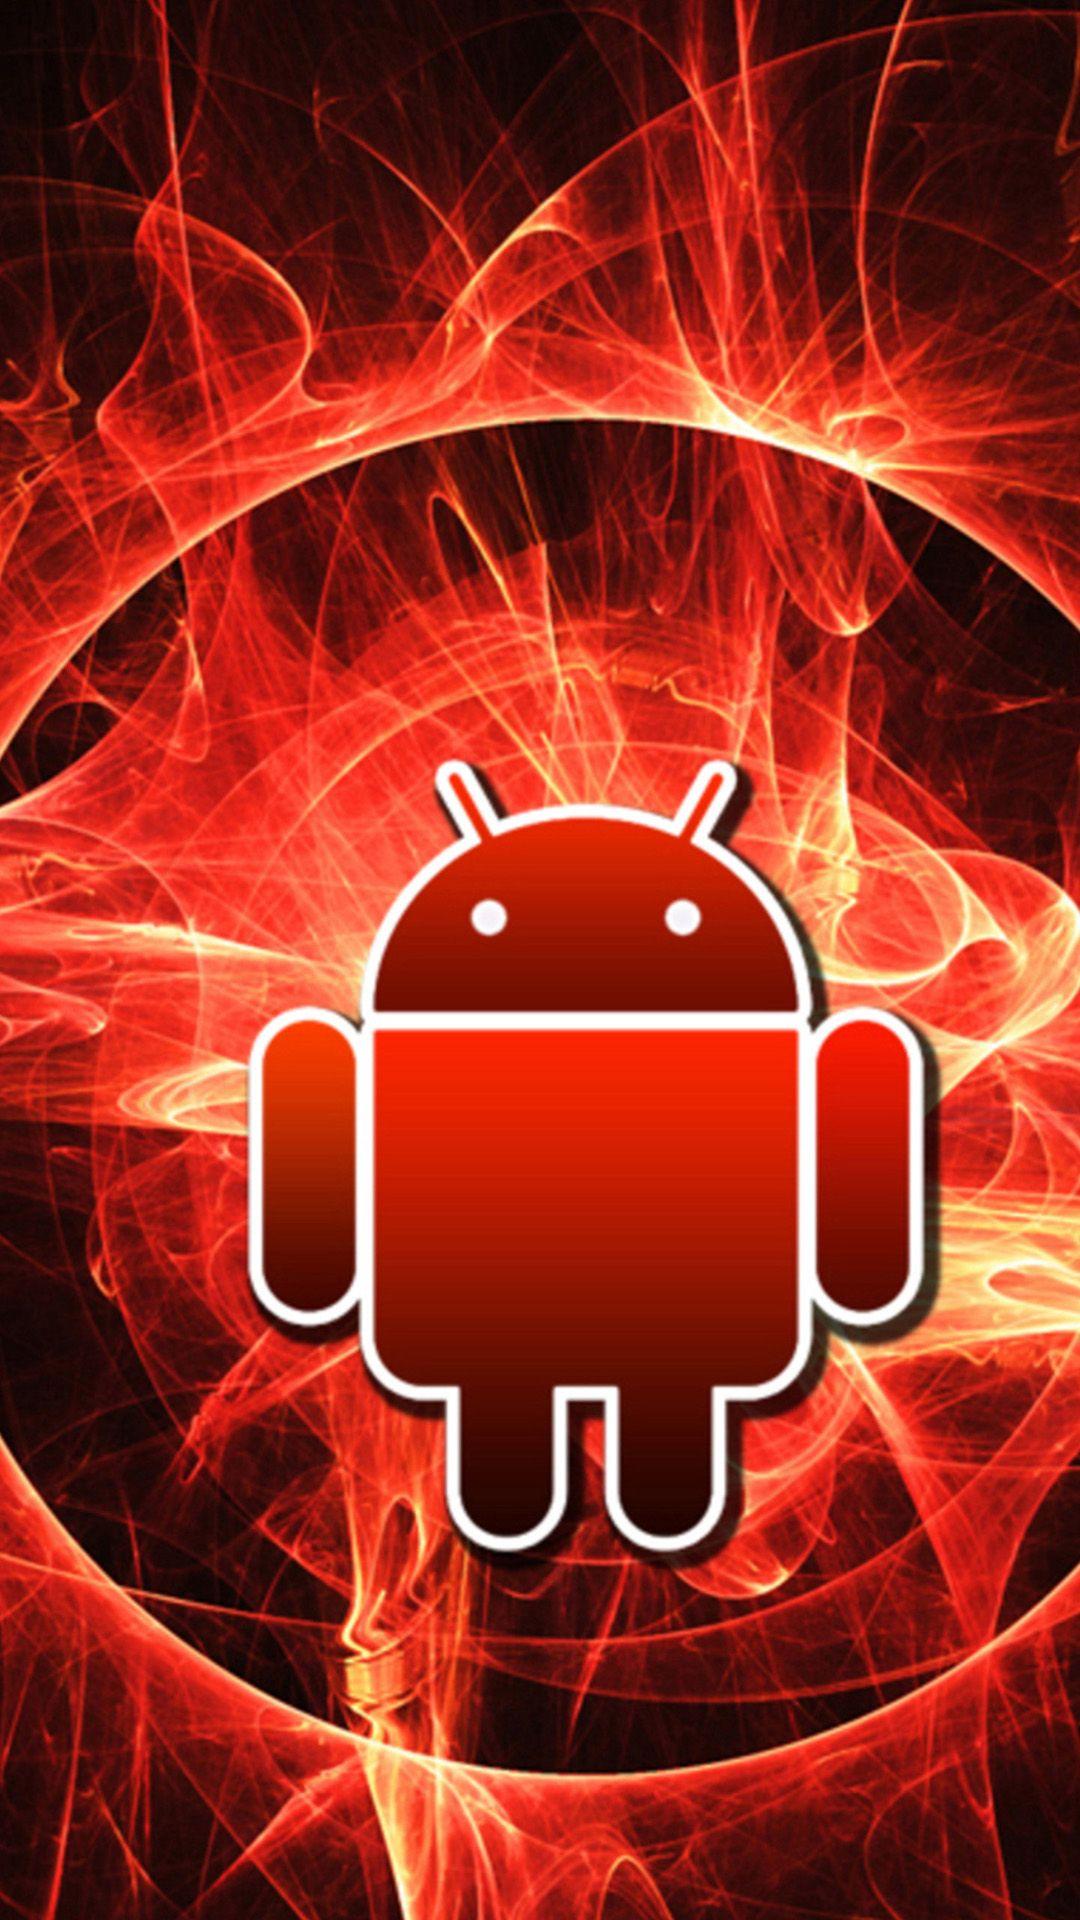 Android Fire Wallpapers - Top Free Android Fire ...